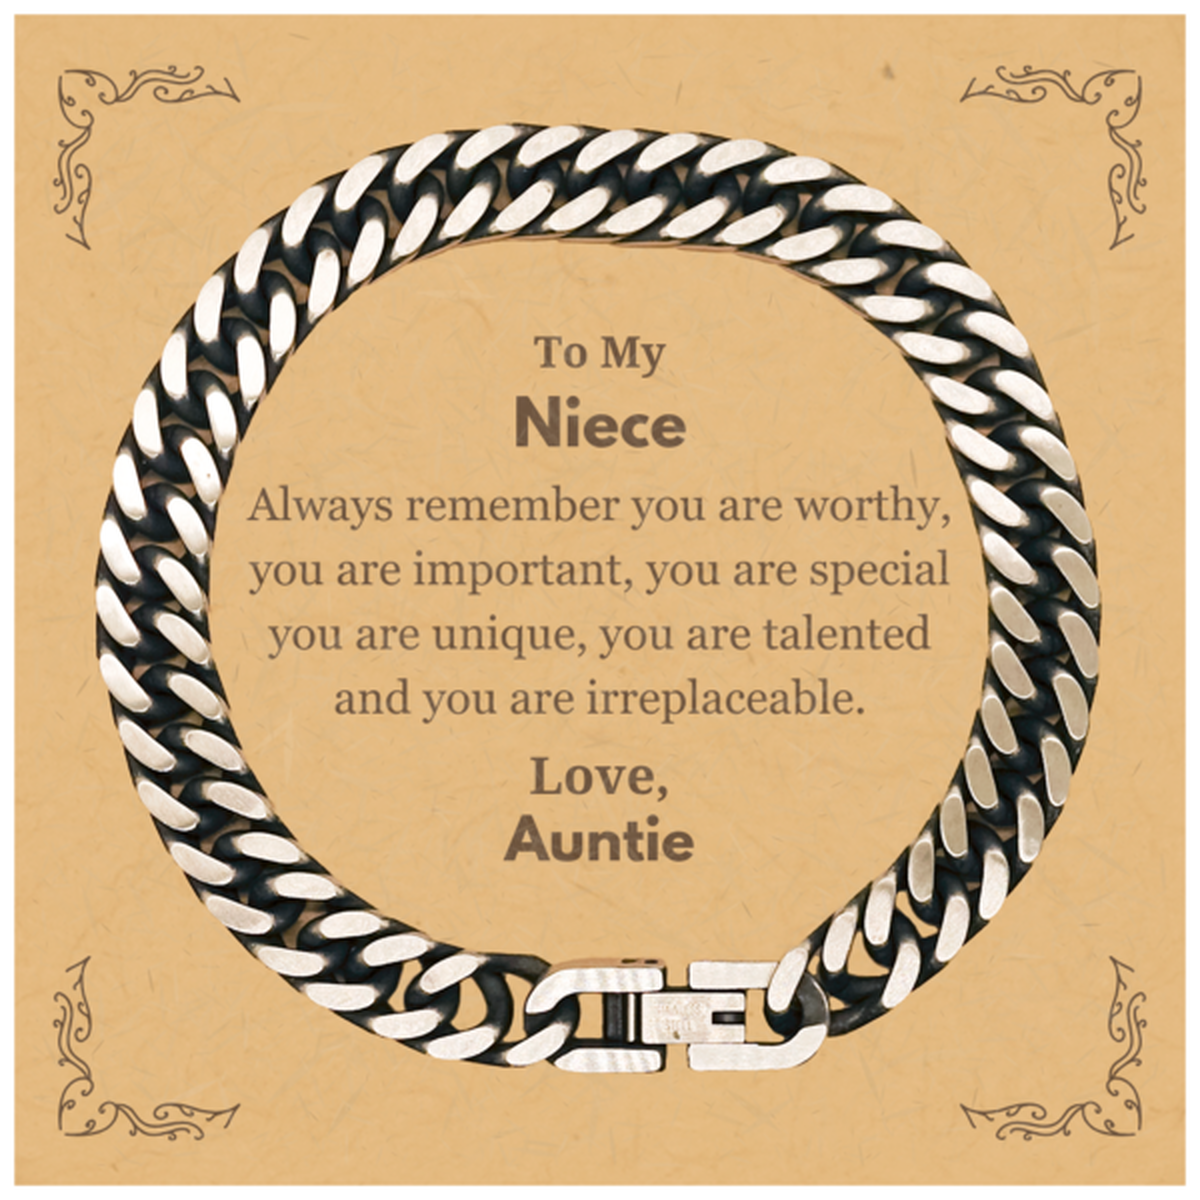 Niece Birthday Gifts from Auntie, Inspirational Cuban Link Chain Bracelet for Niece Christmas Graduation Gifts for Niece Always remember you are worthy, you are important. Love, Auntie